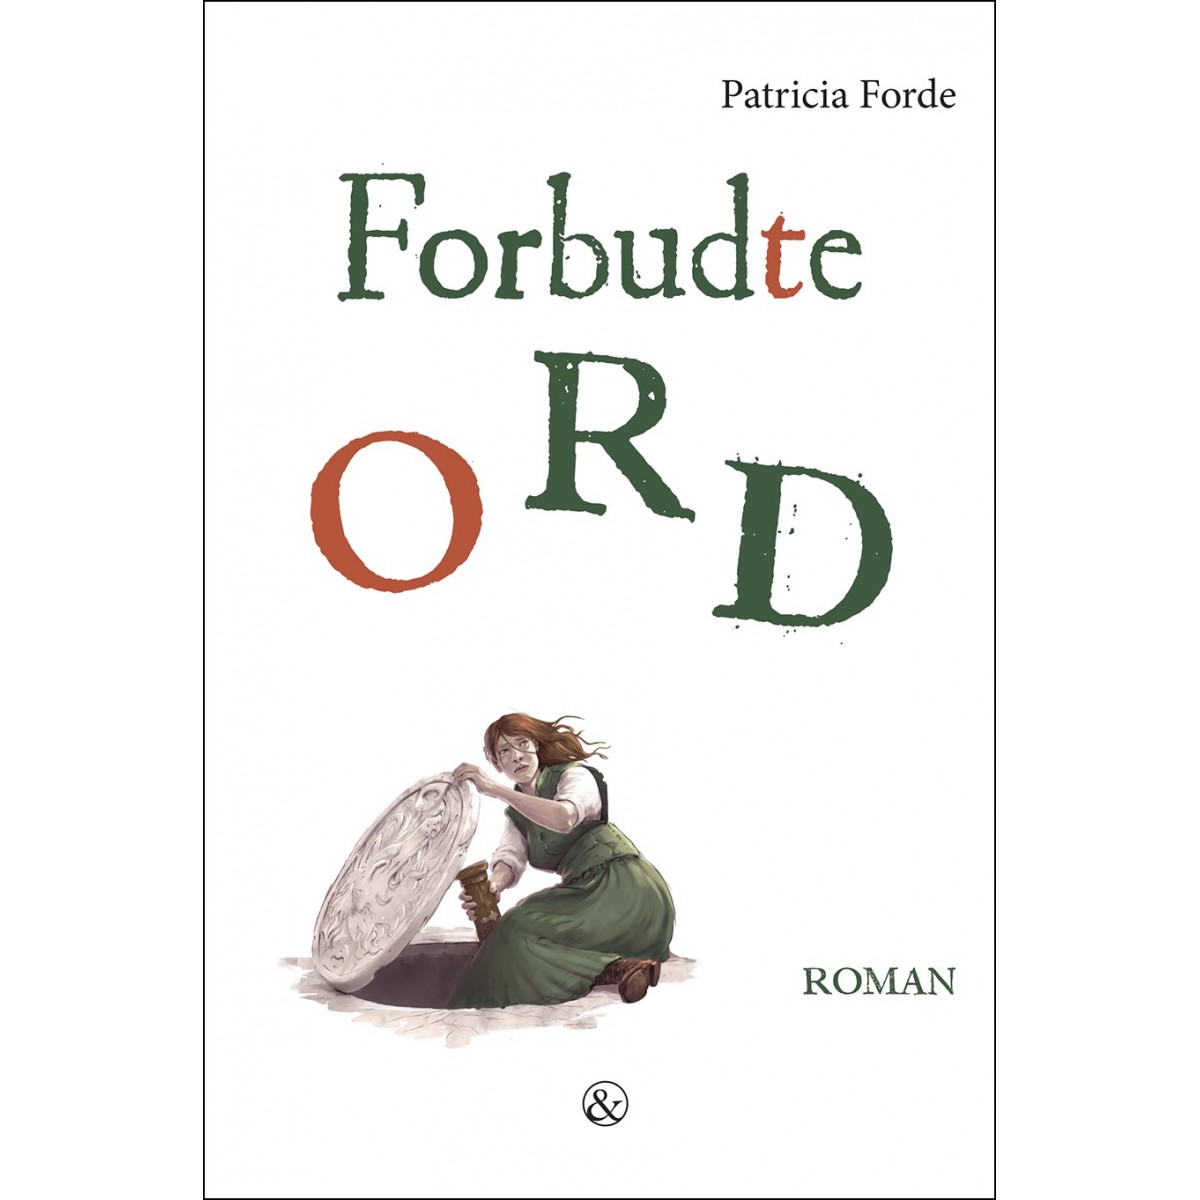 the wordsmith patricia forde